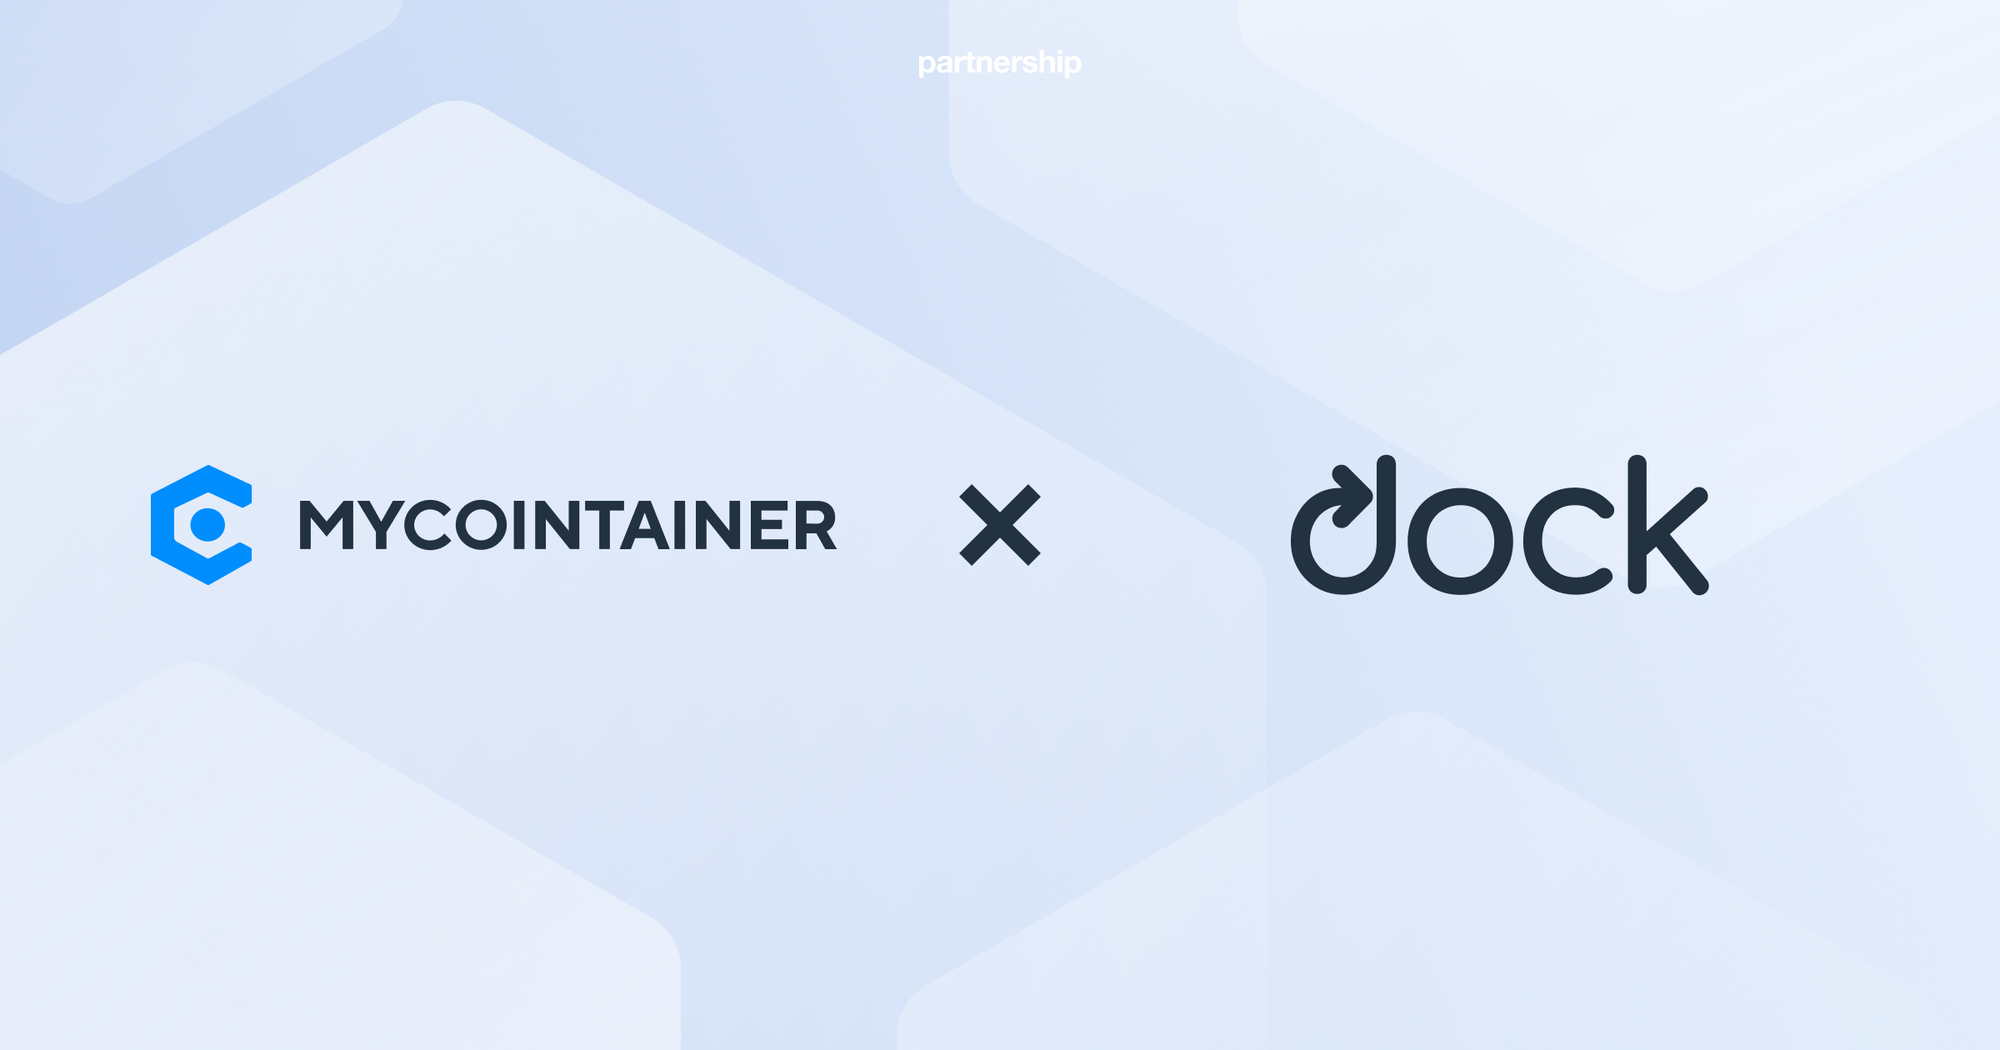 MyCointainer-Dock Partnership Enhances Accessibility To Crypto Products